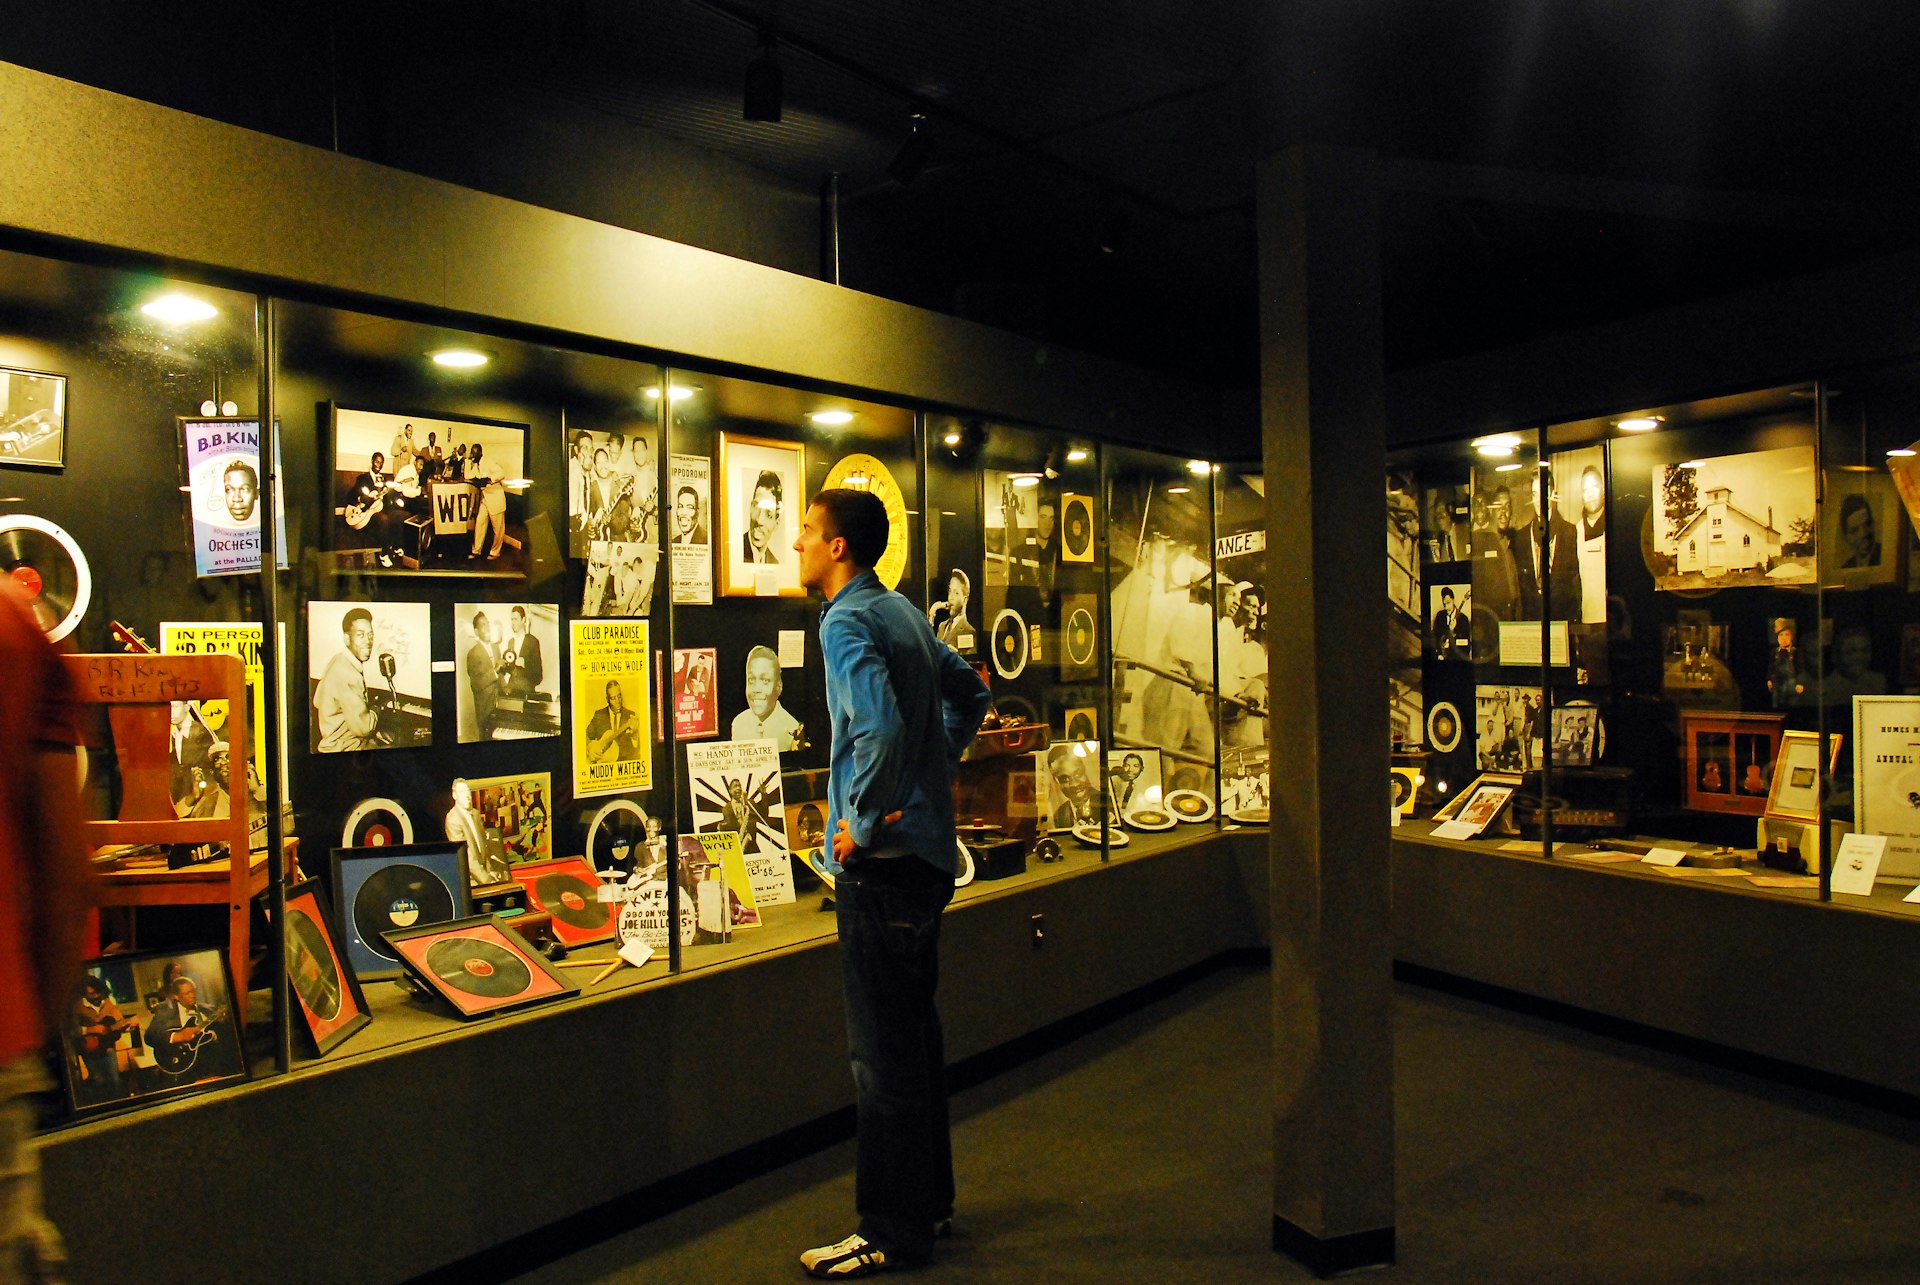 A man looks at old records, posters and photos encased in a large display at Sun Studios in Memphis, Tennessee, USA